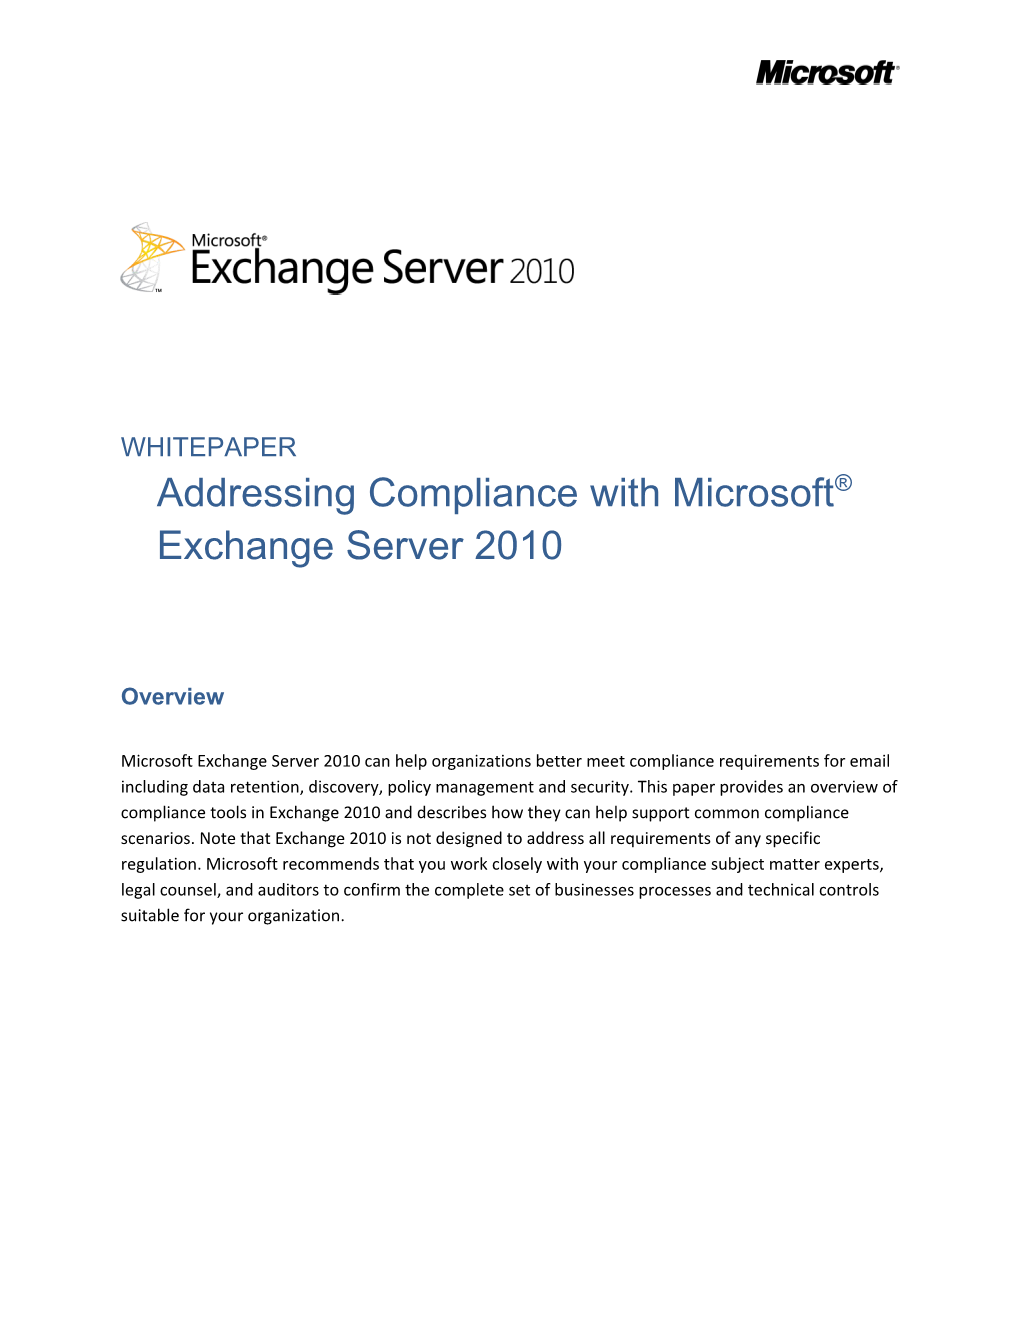 Whitepaperaddressing Compliance with Microsoft Exchange Server 2010